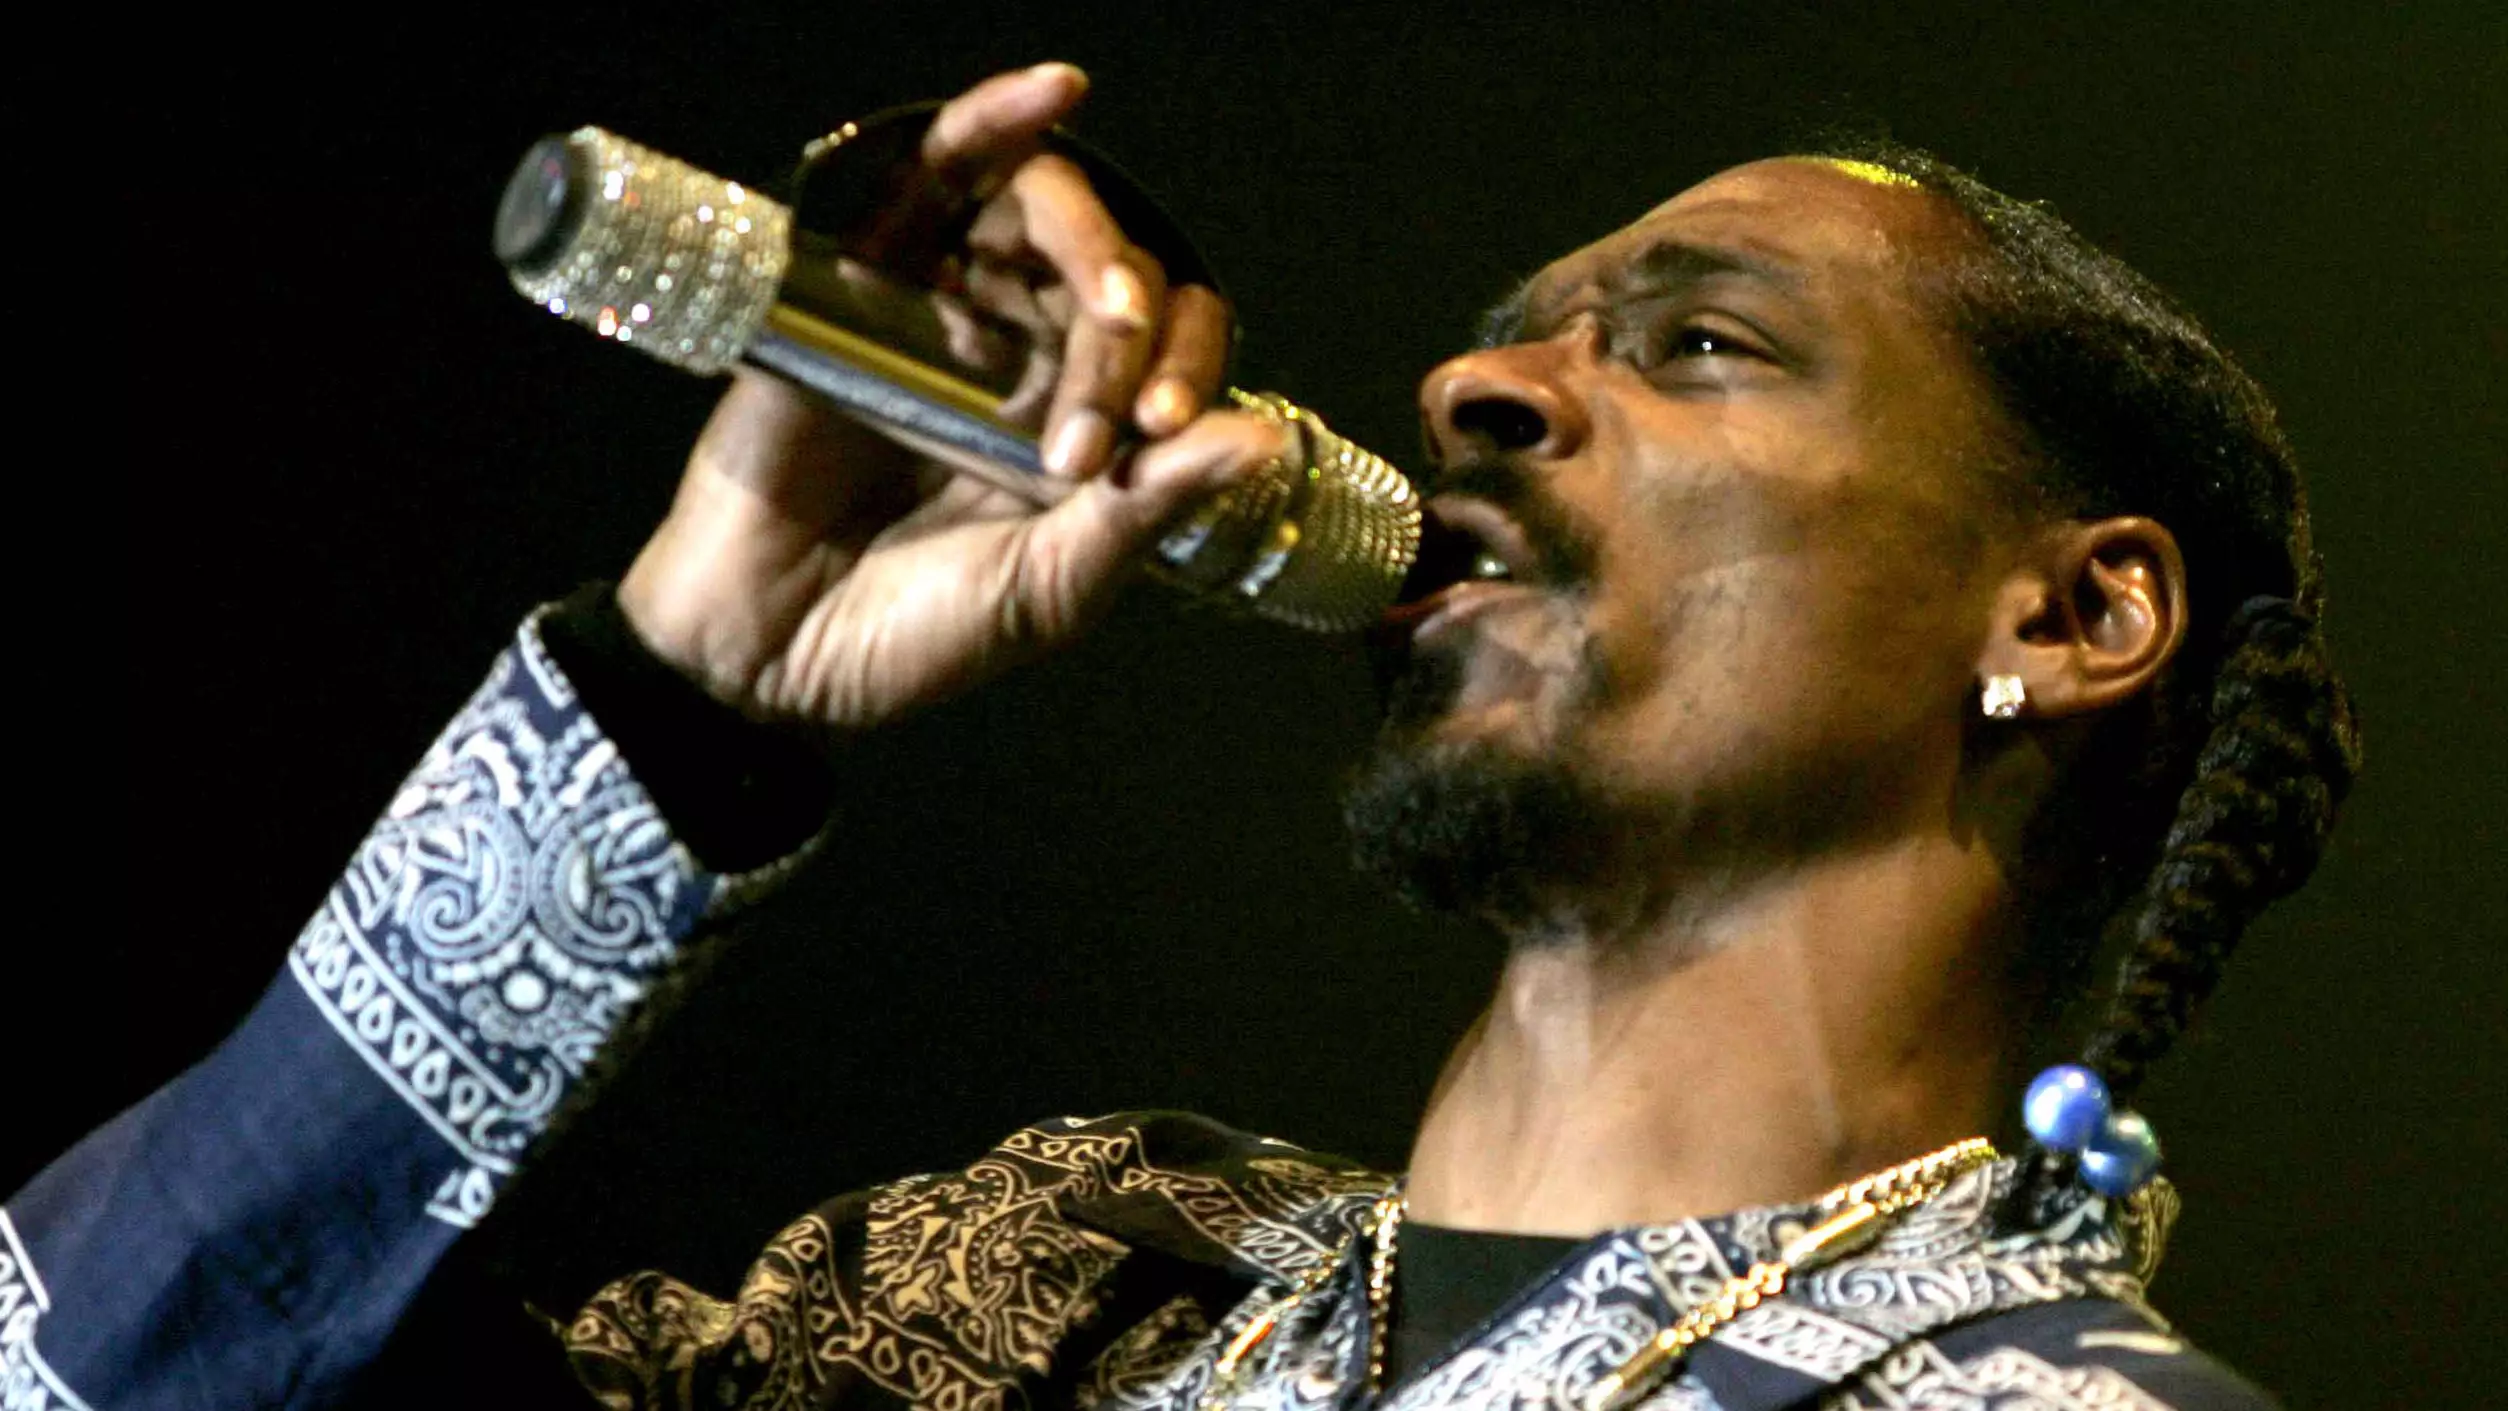 UK Nightclub Owner Says Snoop Dogg Left Hundreds Of Thousand Of Pounds In His Club